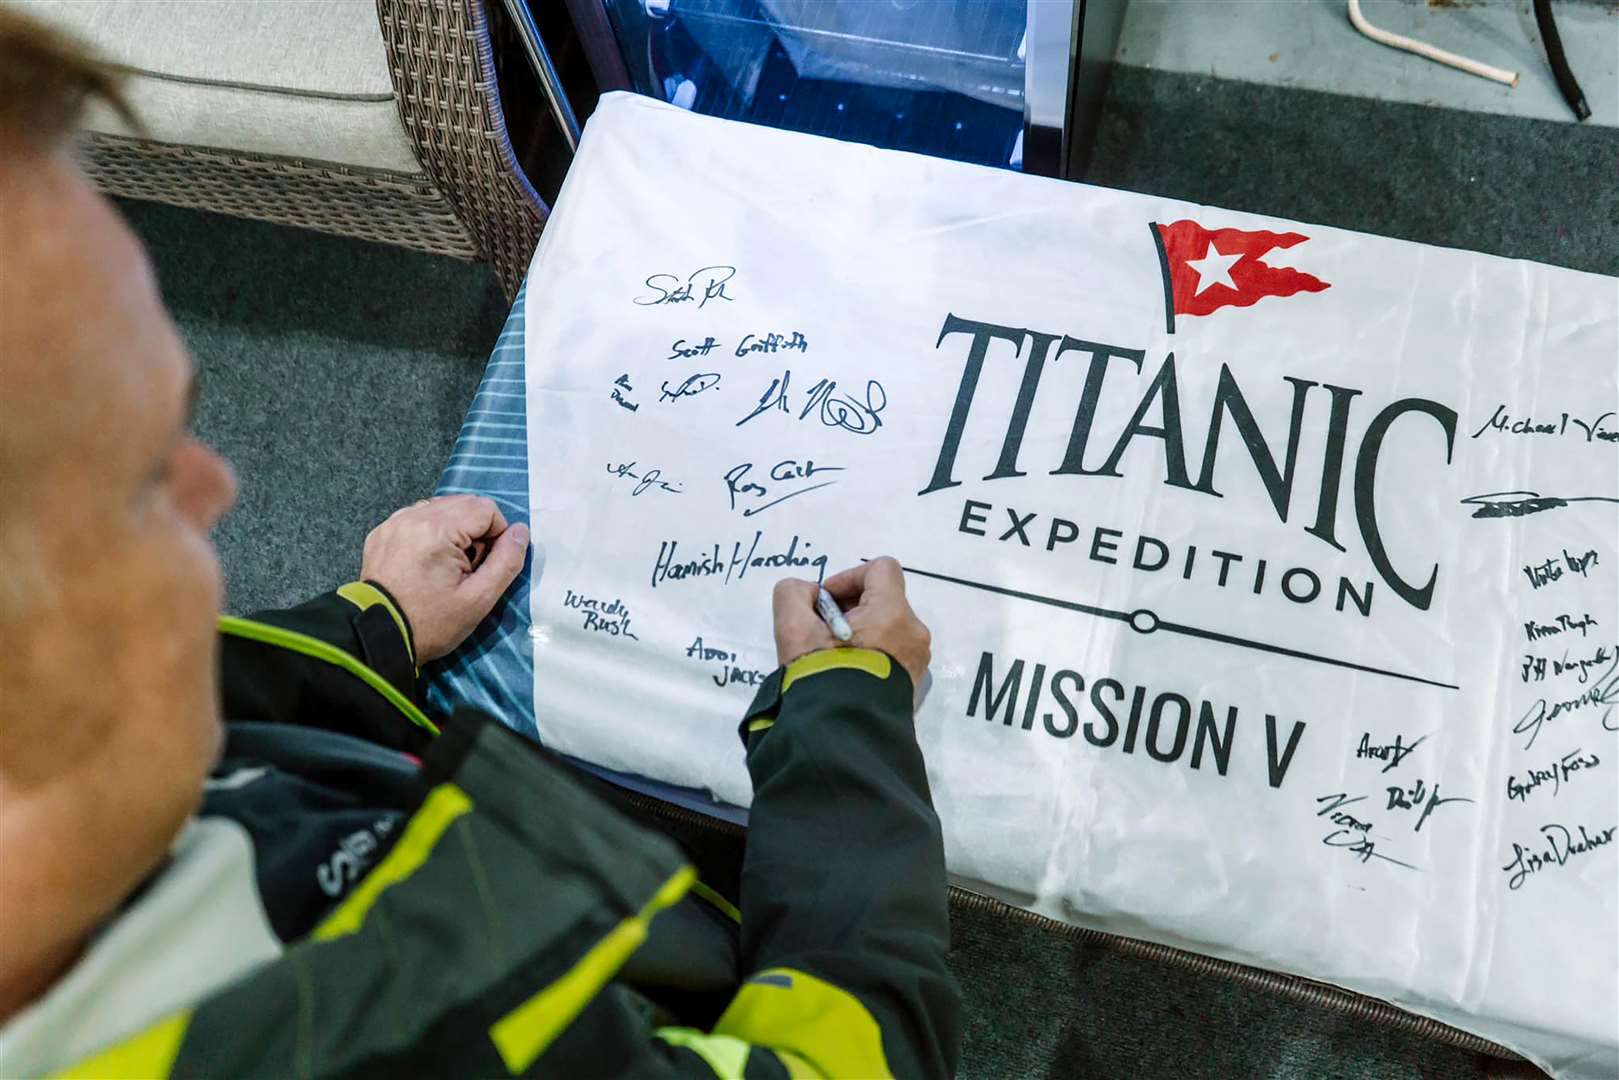 Hamish Harding is one of five people on board a submersible tourist vessel which went missing during a voyage to the Titanic shipwreck (Dirty Dozen Productions/PA)